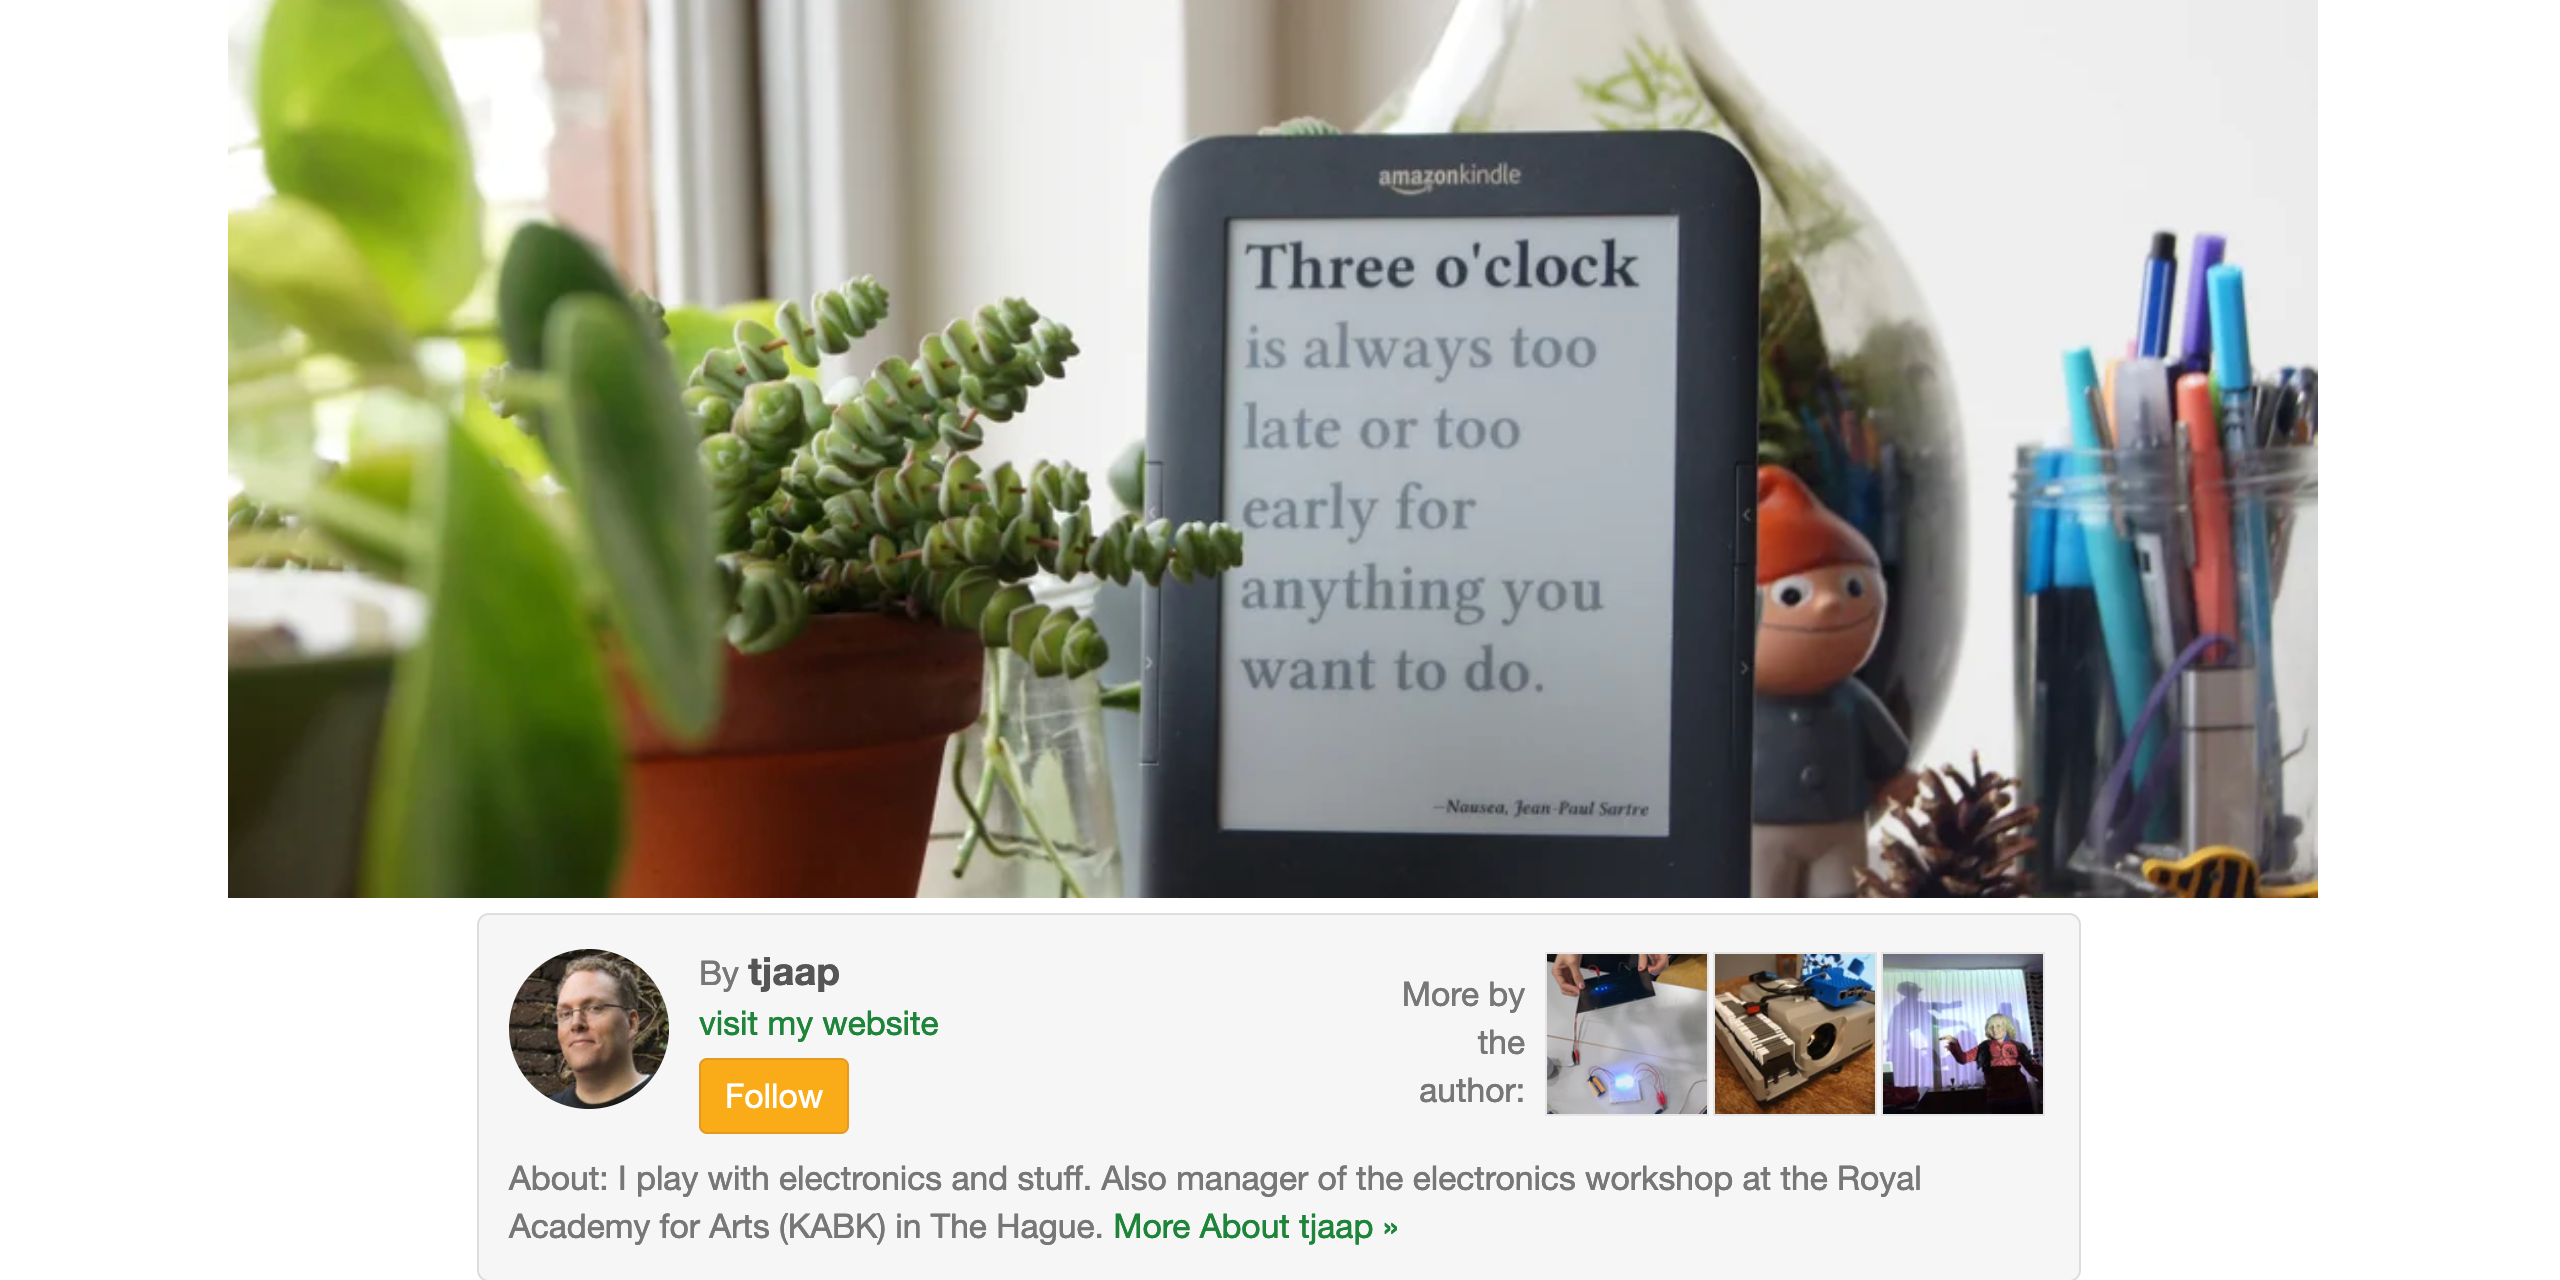 A screenshot showing a kindle used as a clock with literary quotes to tell the time